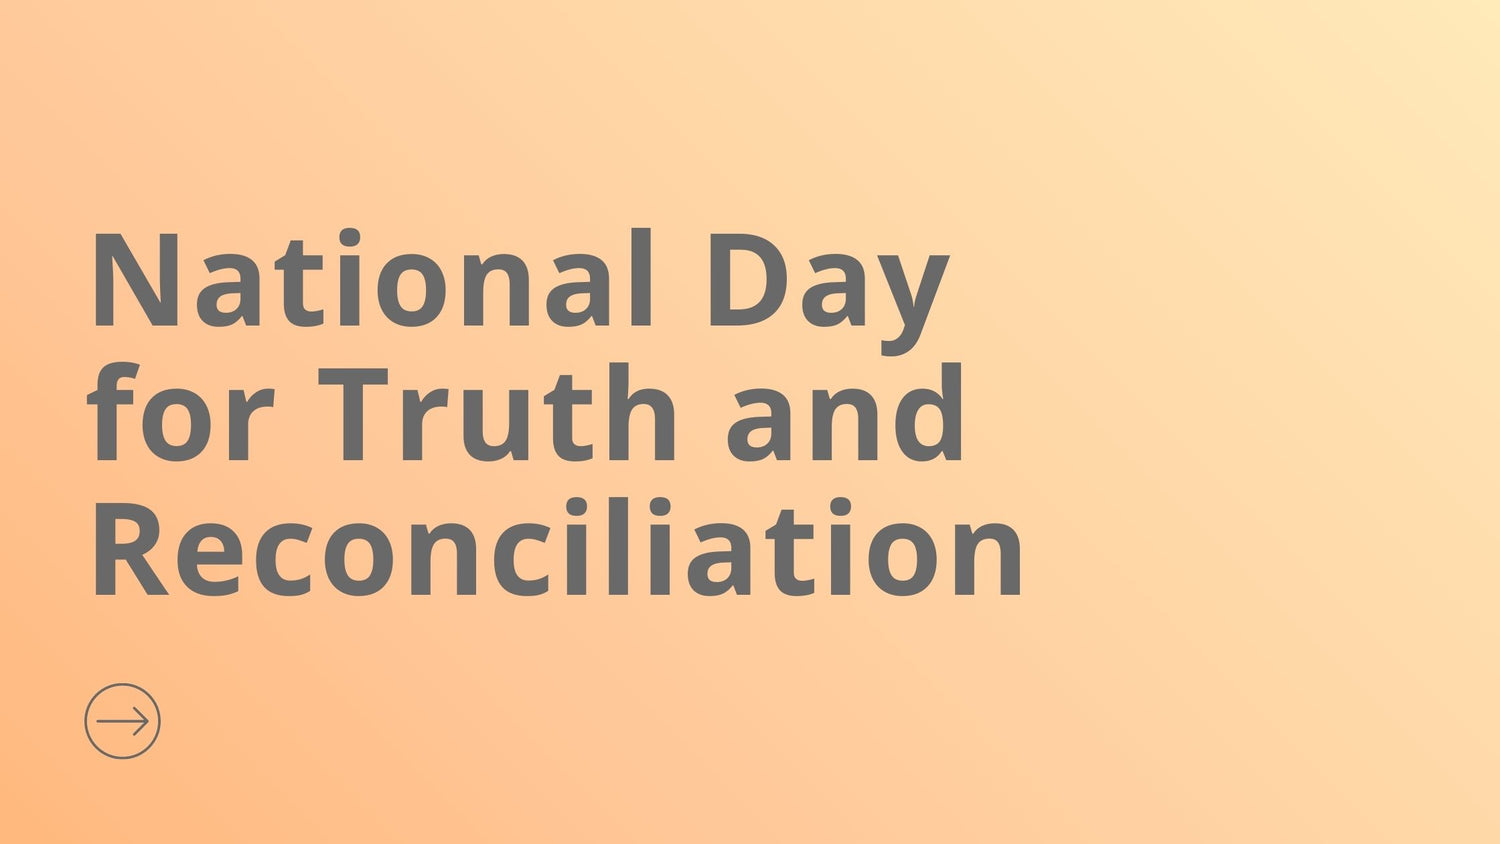 Today is National Day for Truth and Reconciliation